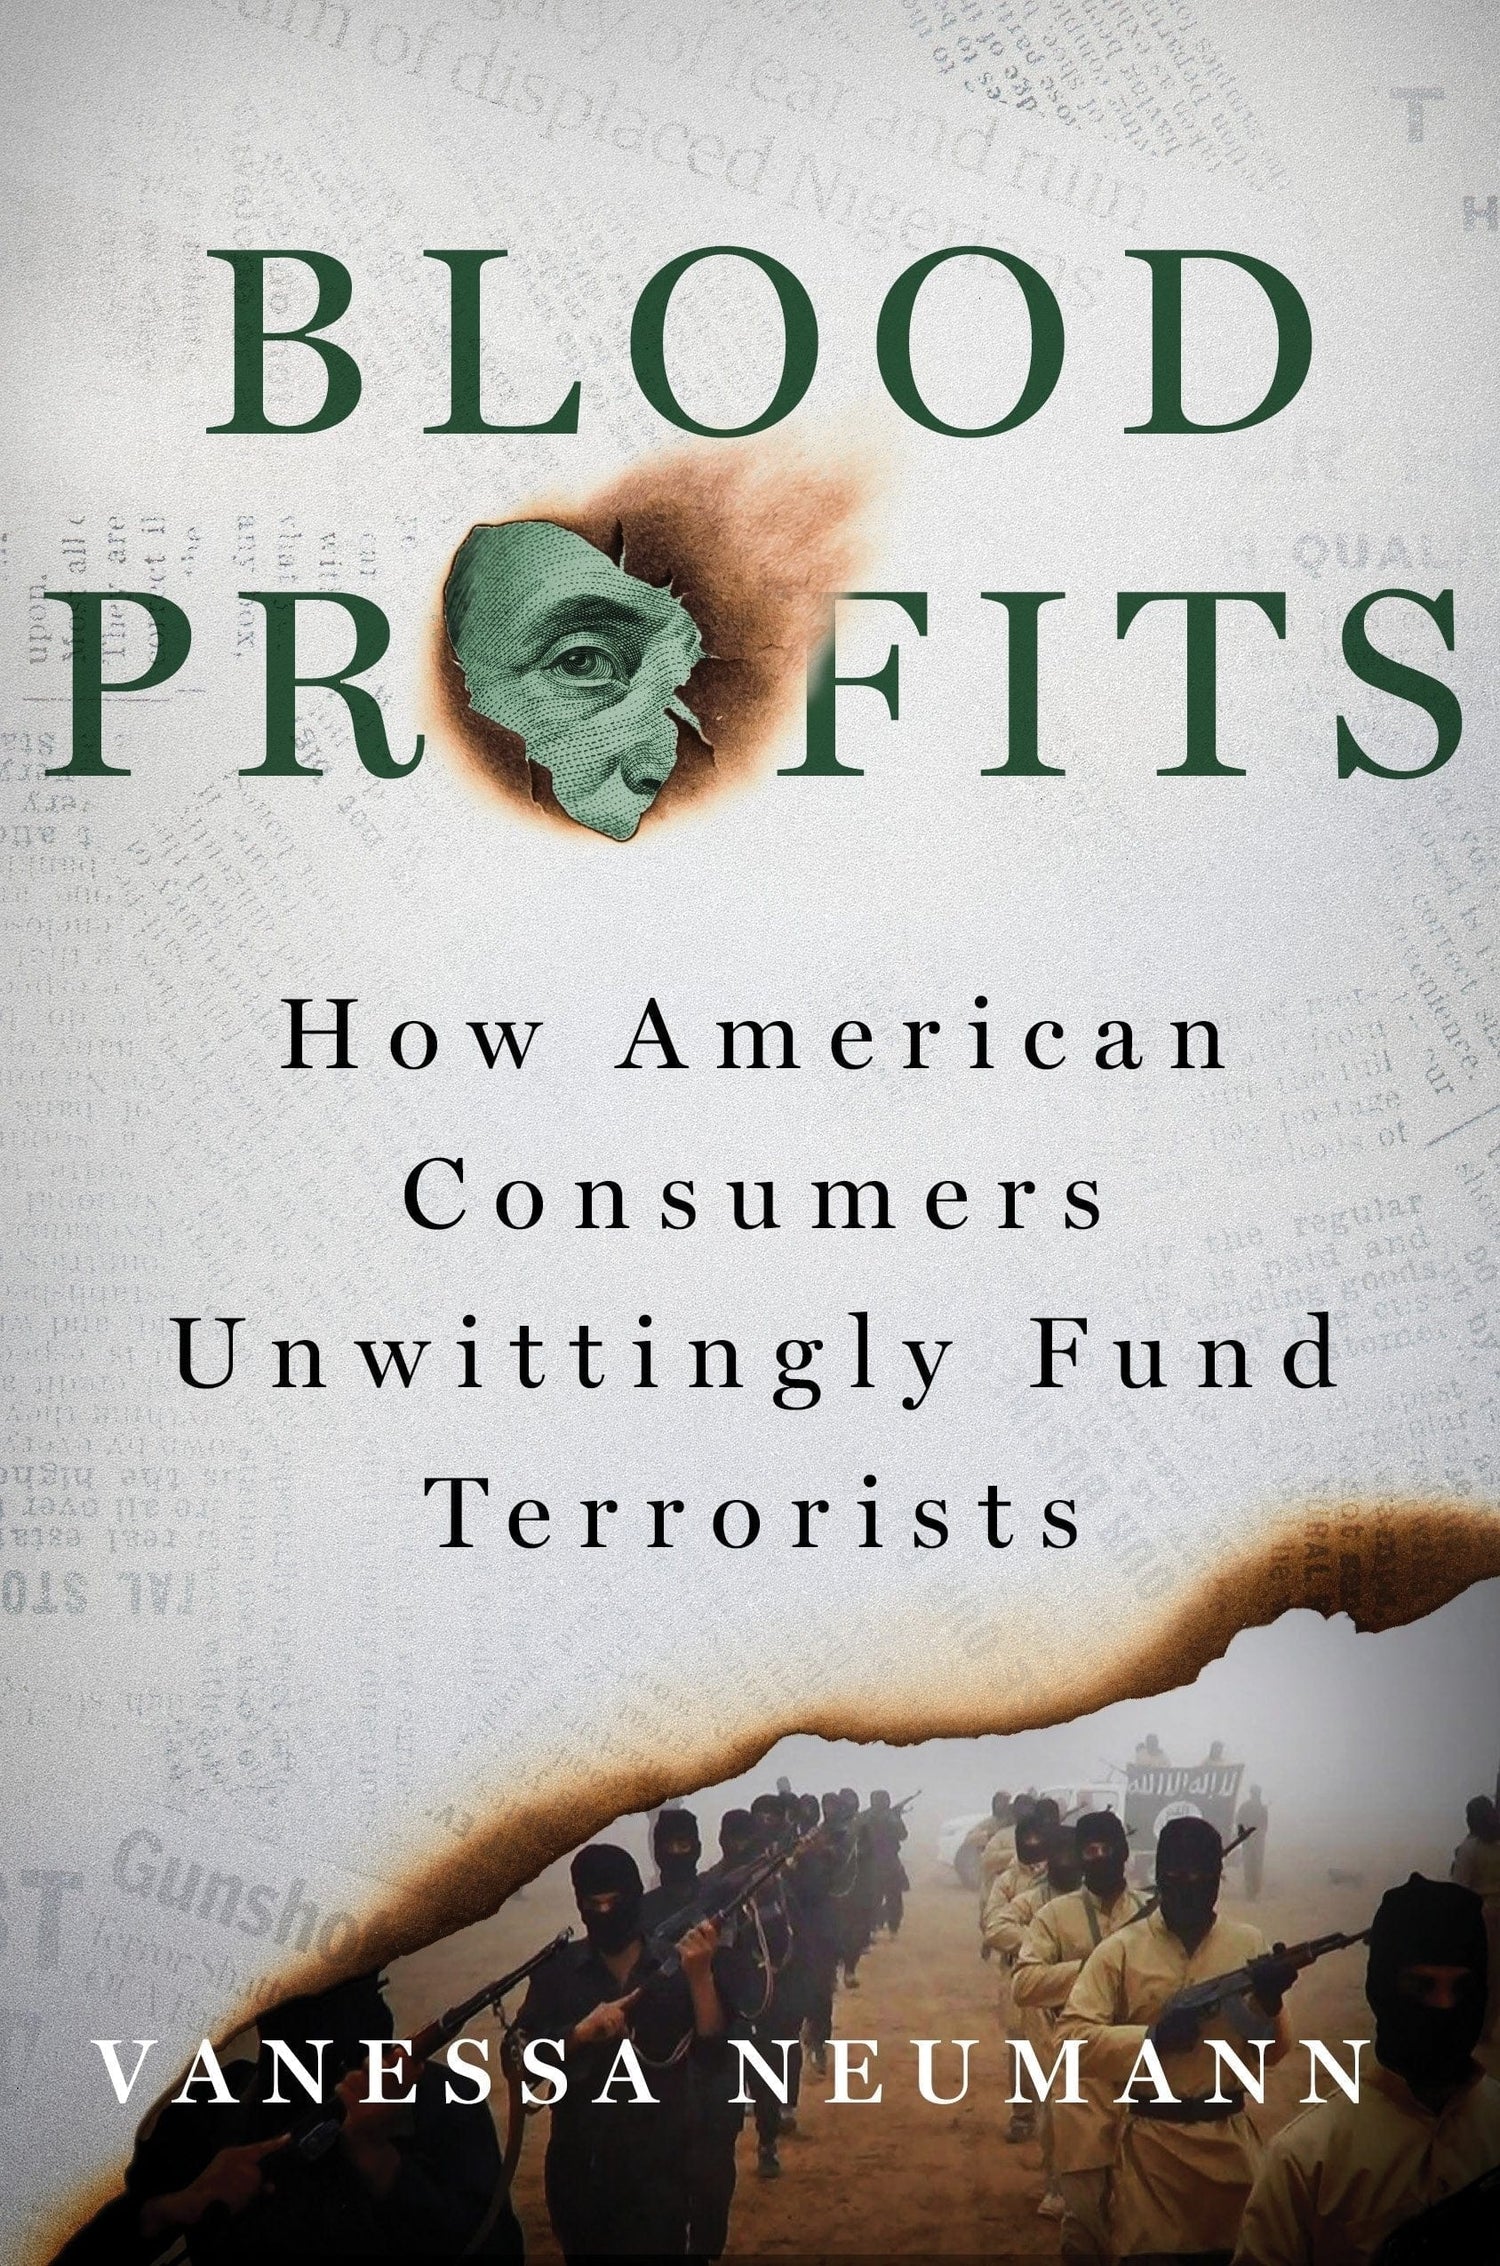 Blood Profits: How American Consumers Unwittingly Fund Terrorists